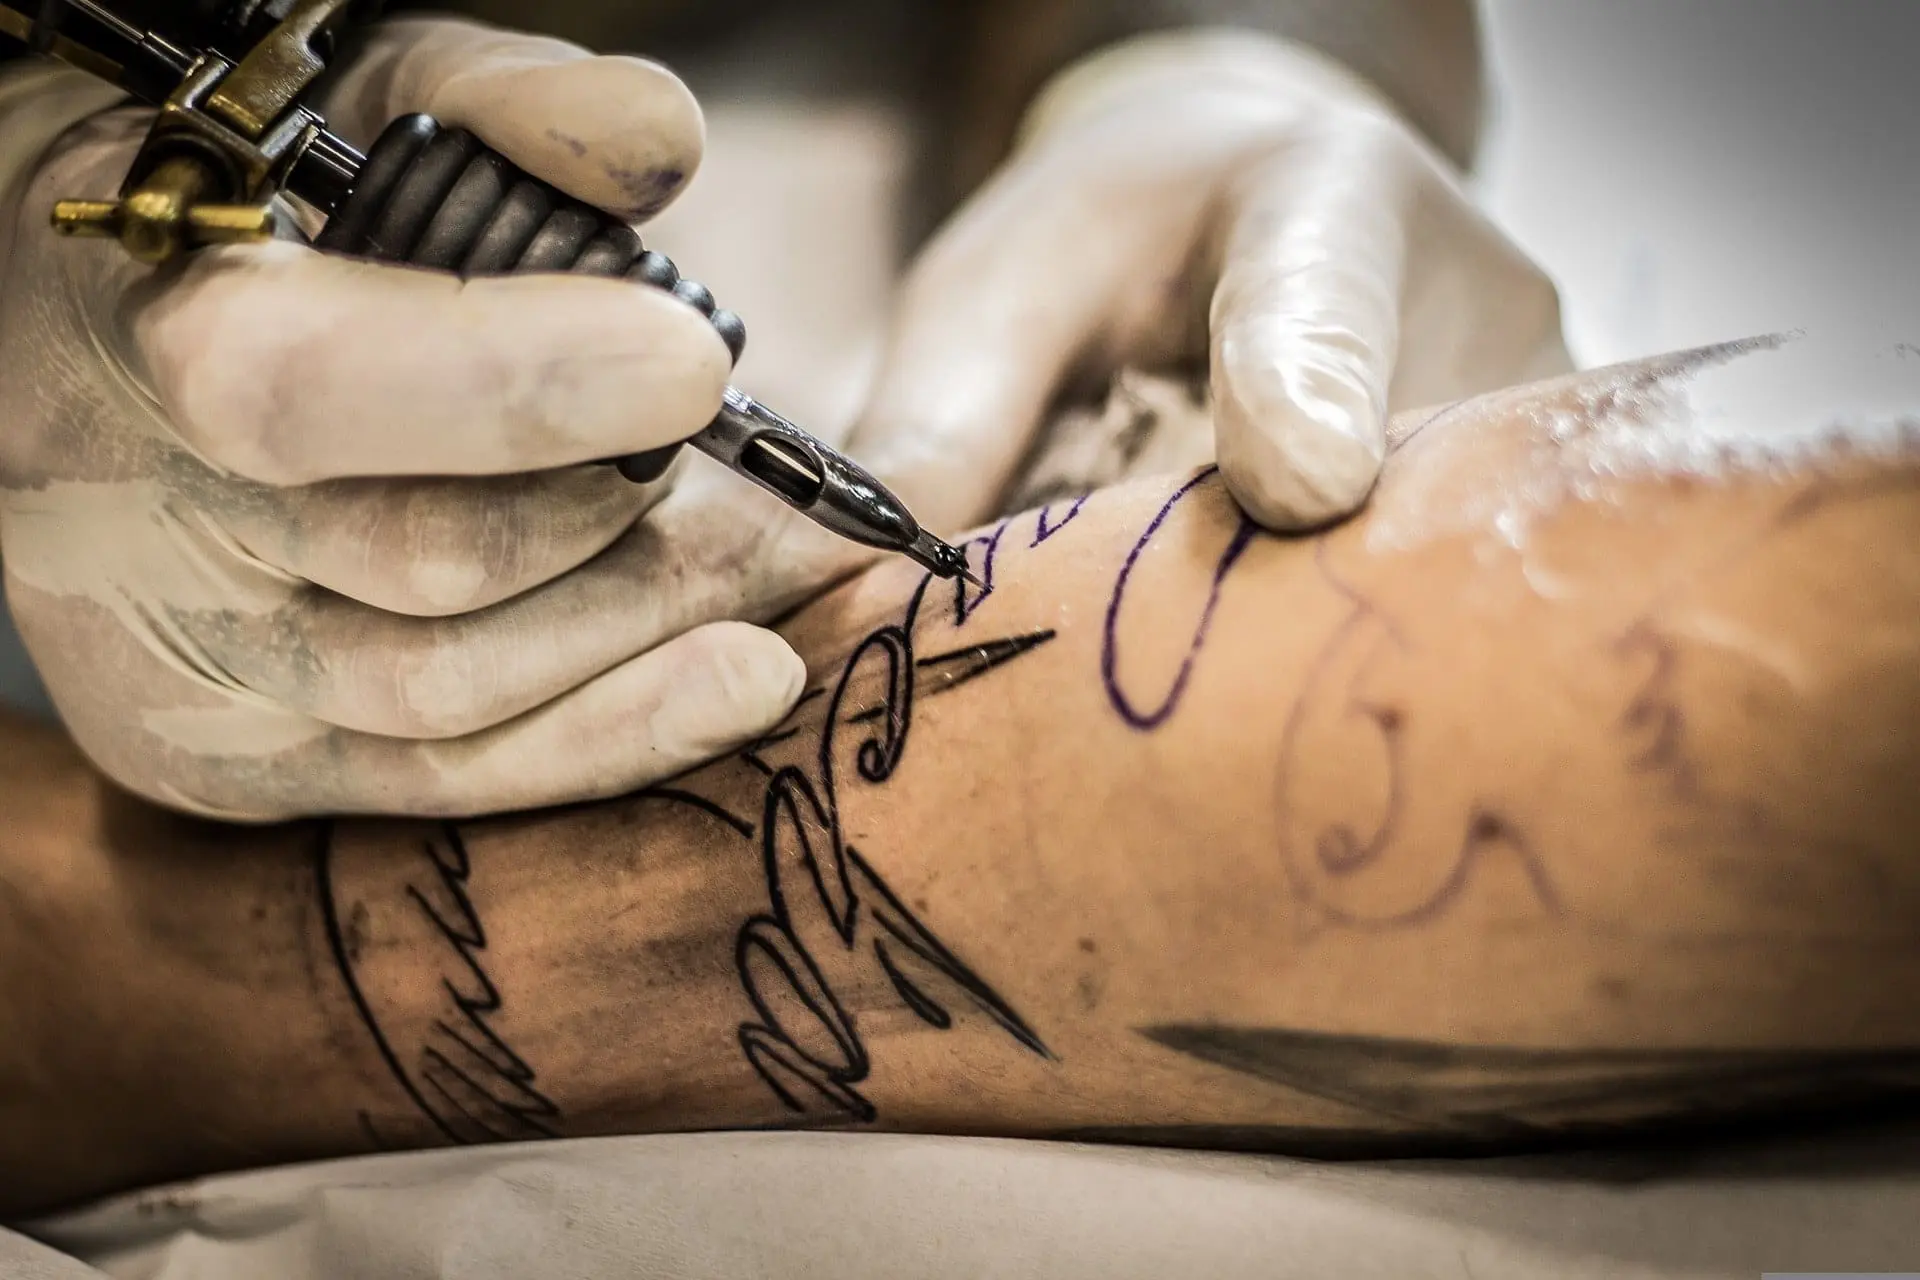 Study shows tattoos may raise risk of cancer